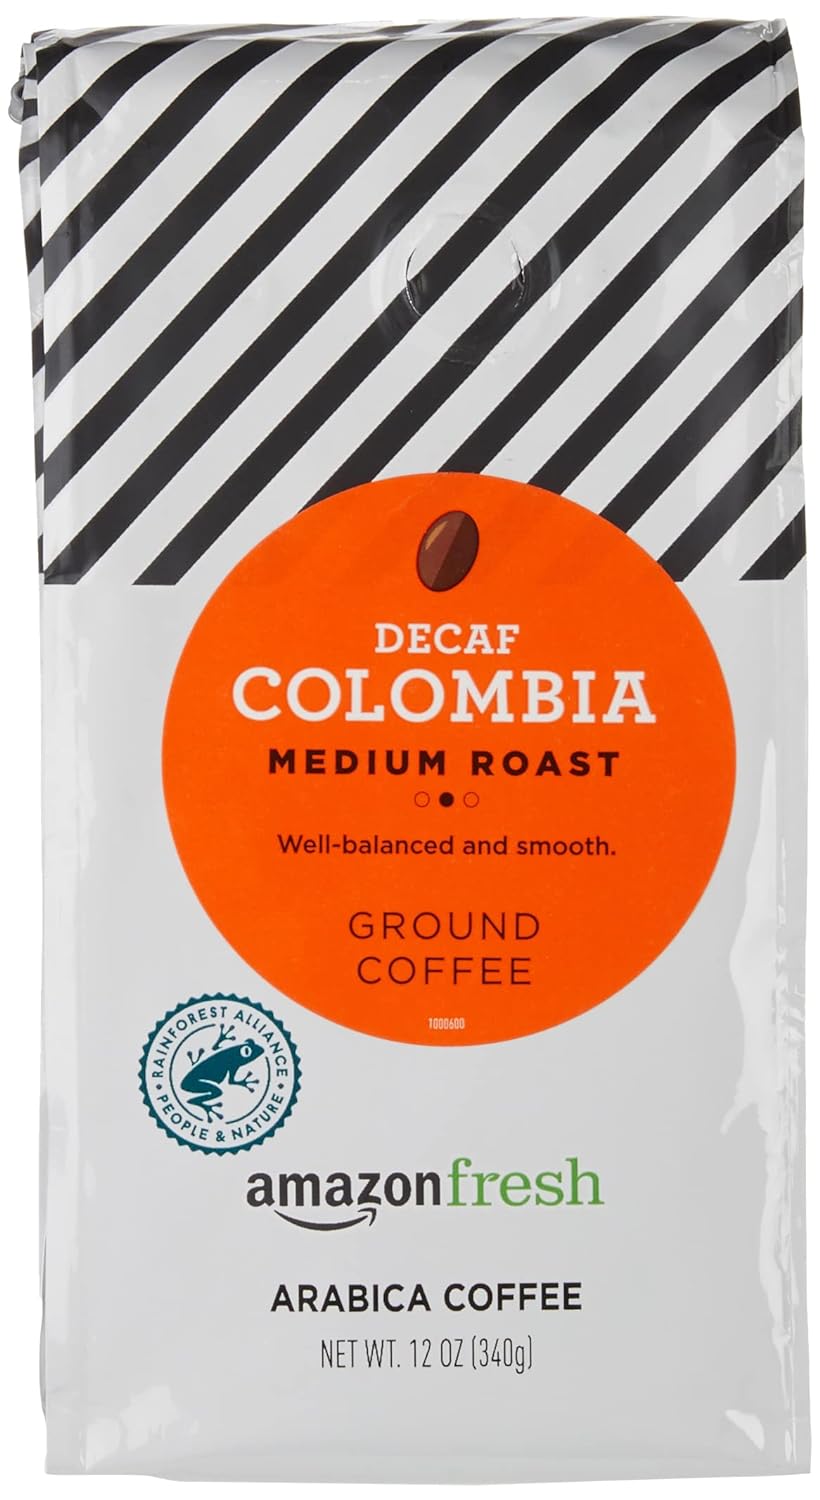 Been trying almost every brand of decaffeinated coffee I can find. And am surprised this generic brand it pretty good. It is the lowest priced decaf Ive found so far and ranks with the best. Highly recommended.